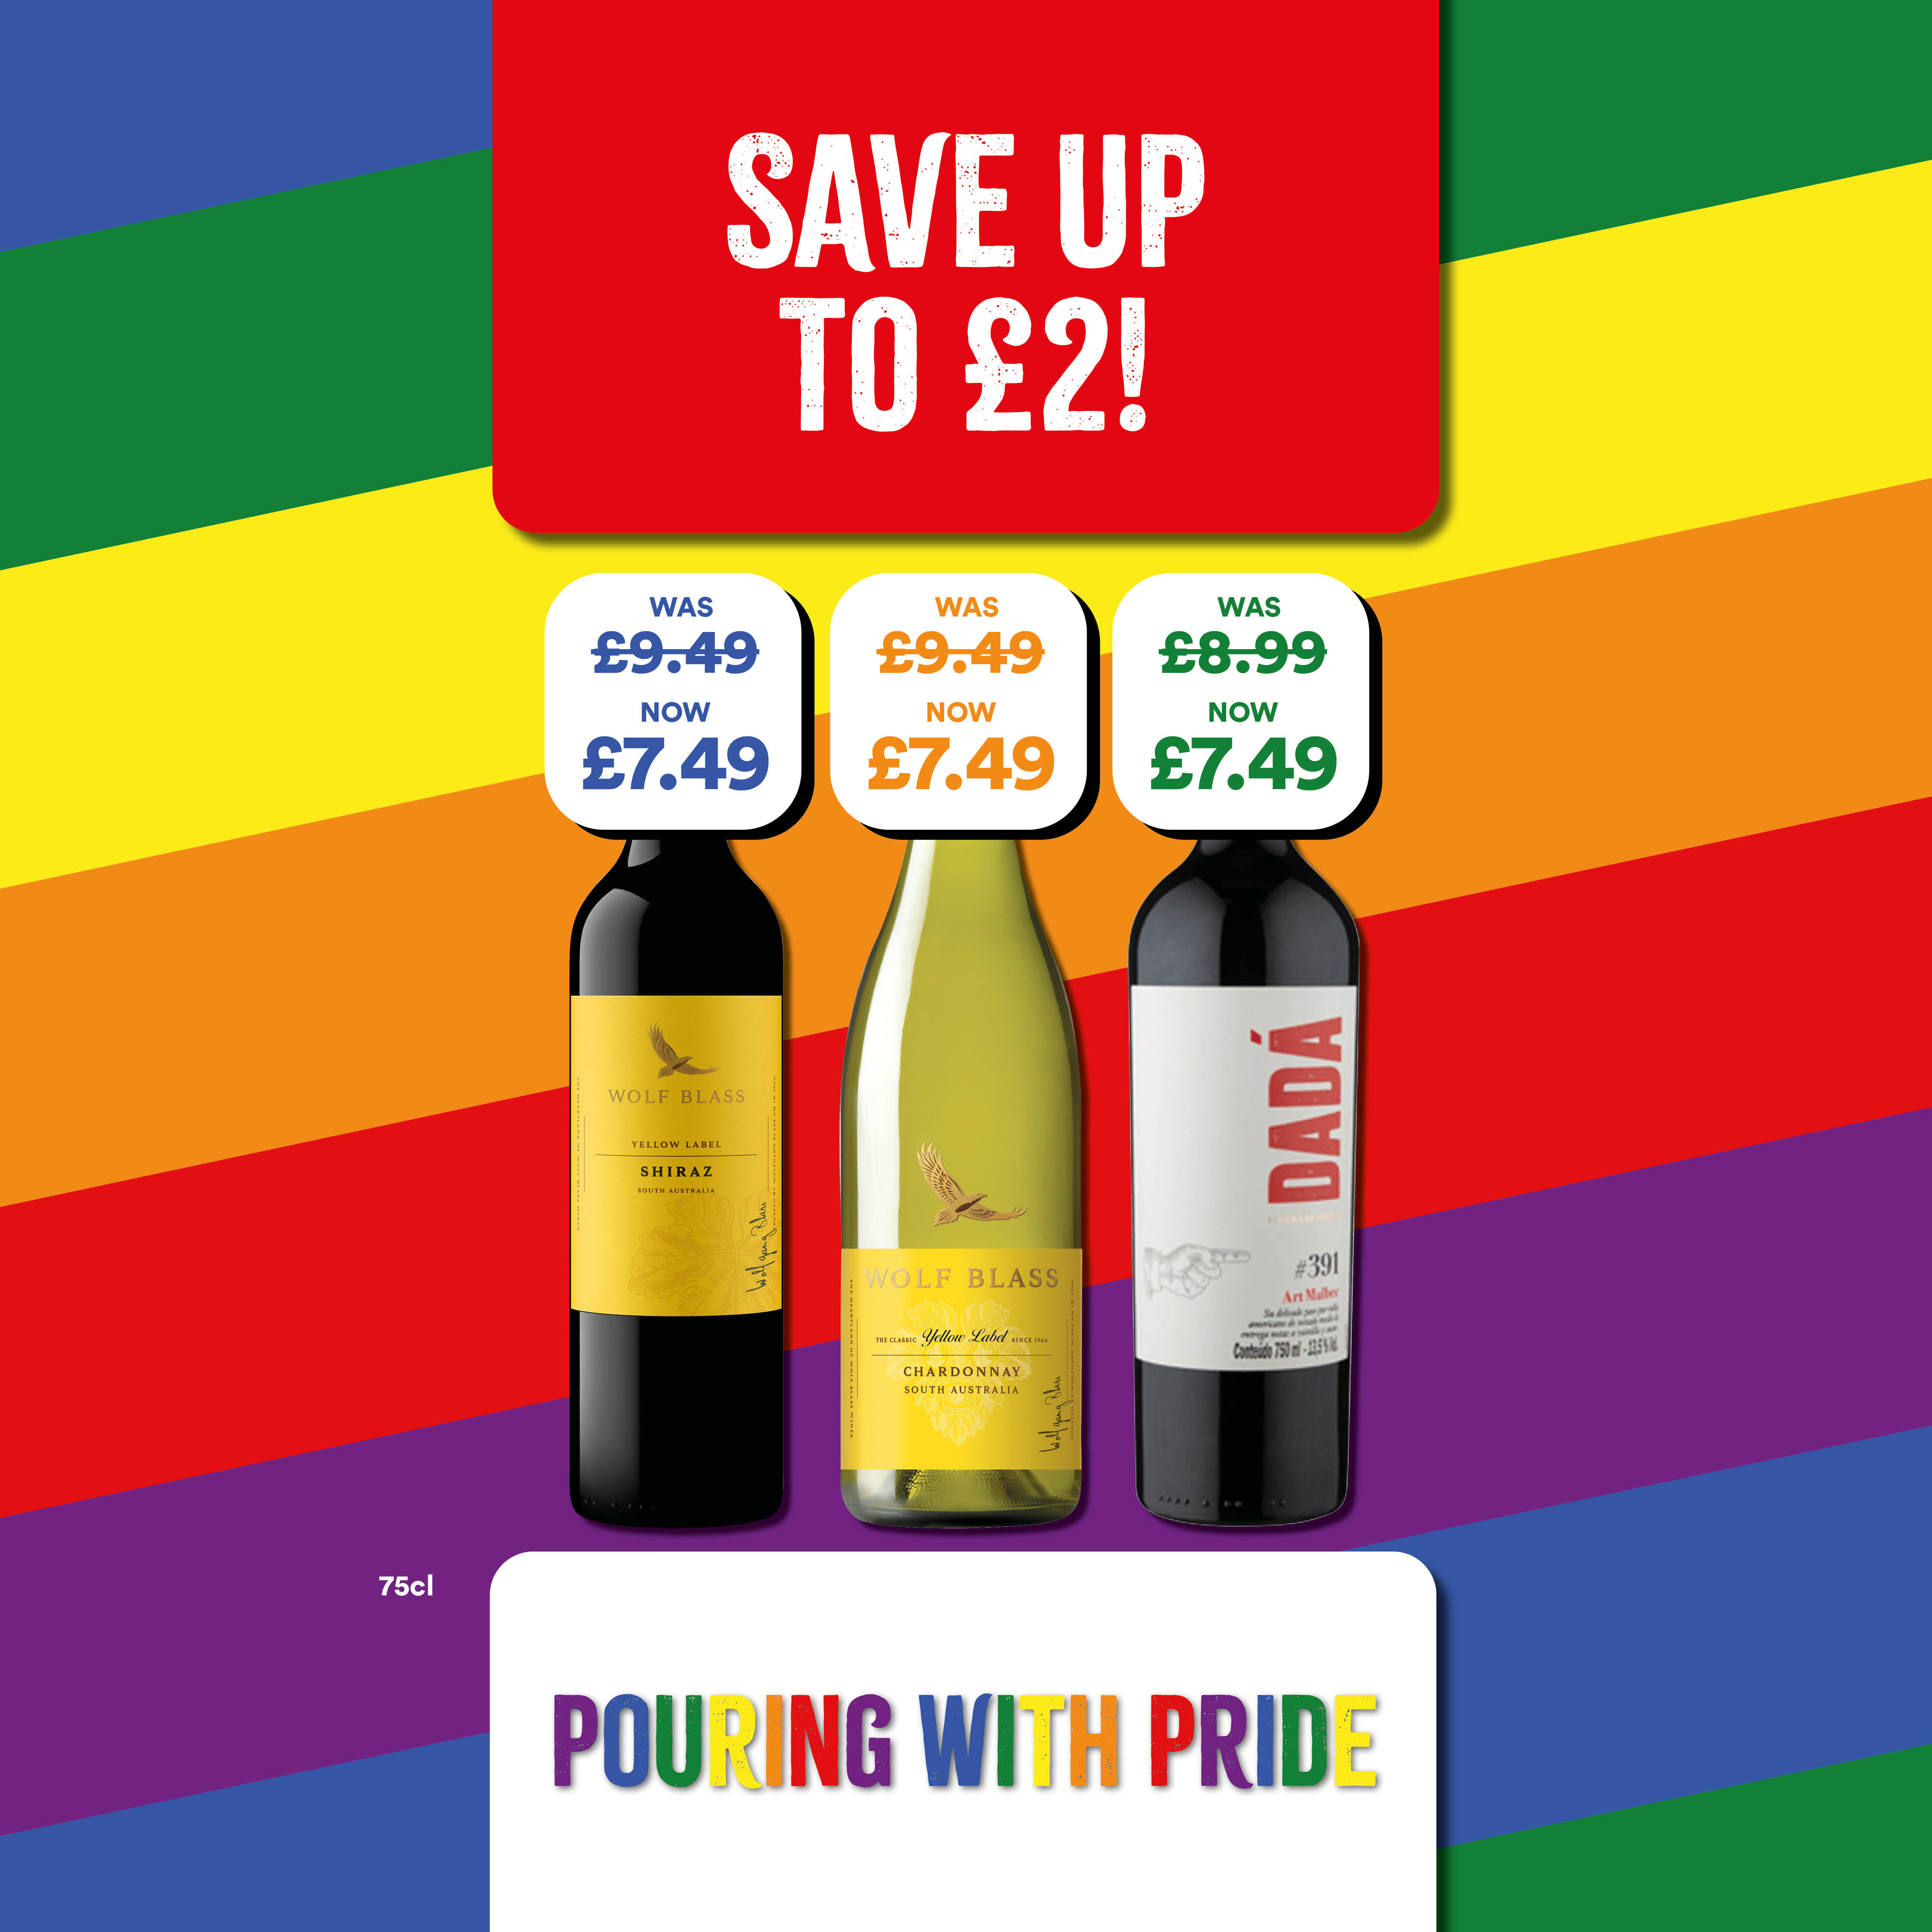 Save up to £2 on wold Class and Dada Wine. Bargain Booze Whitby 01947 820737